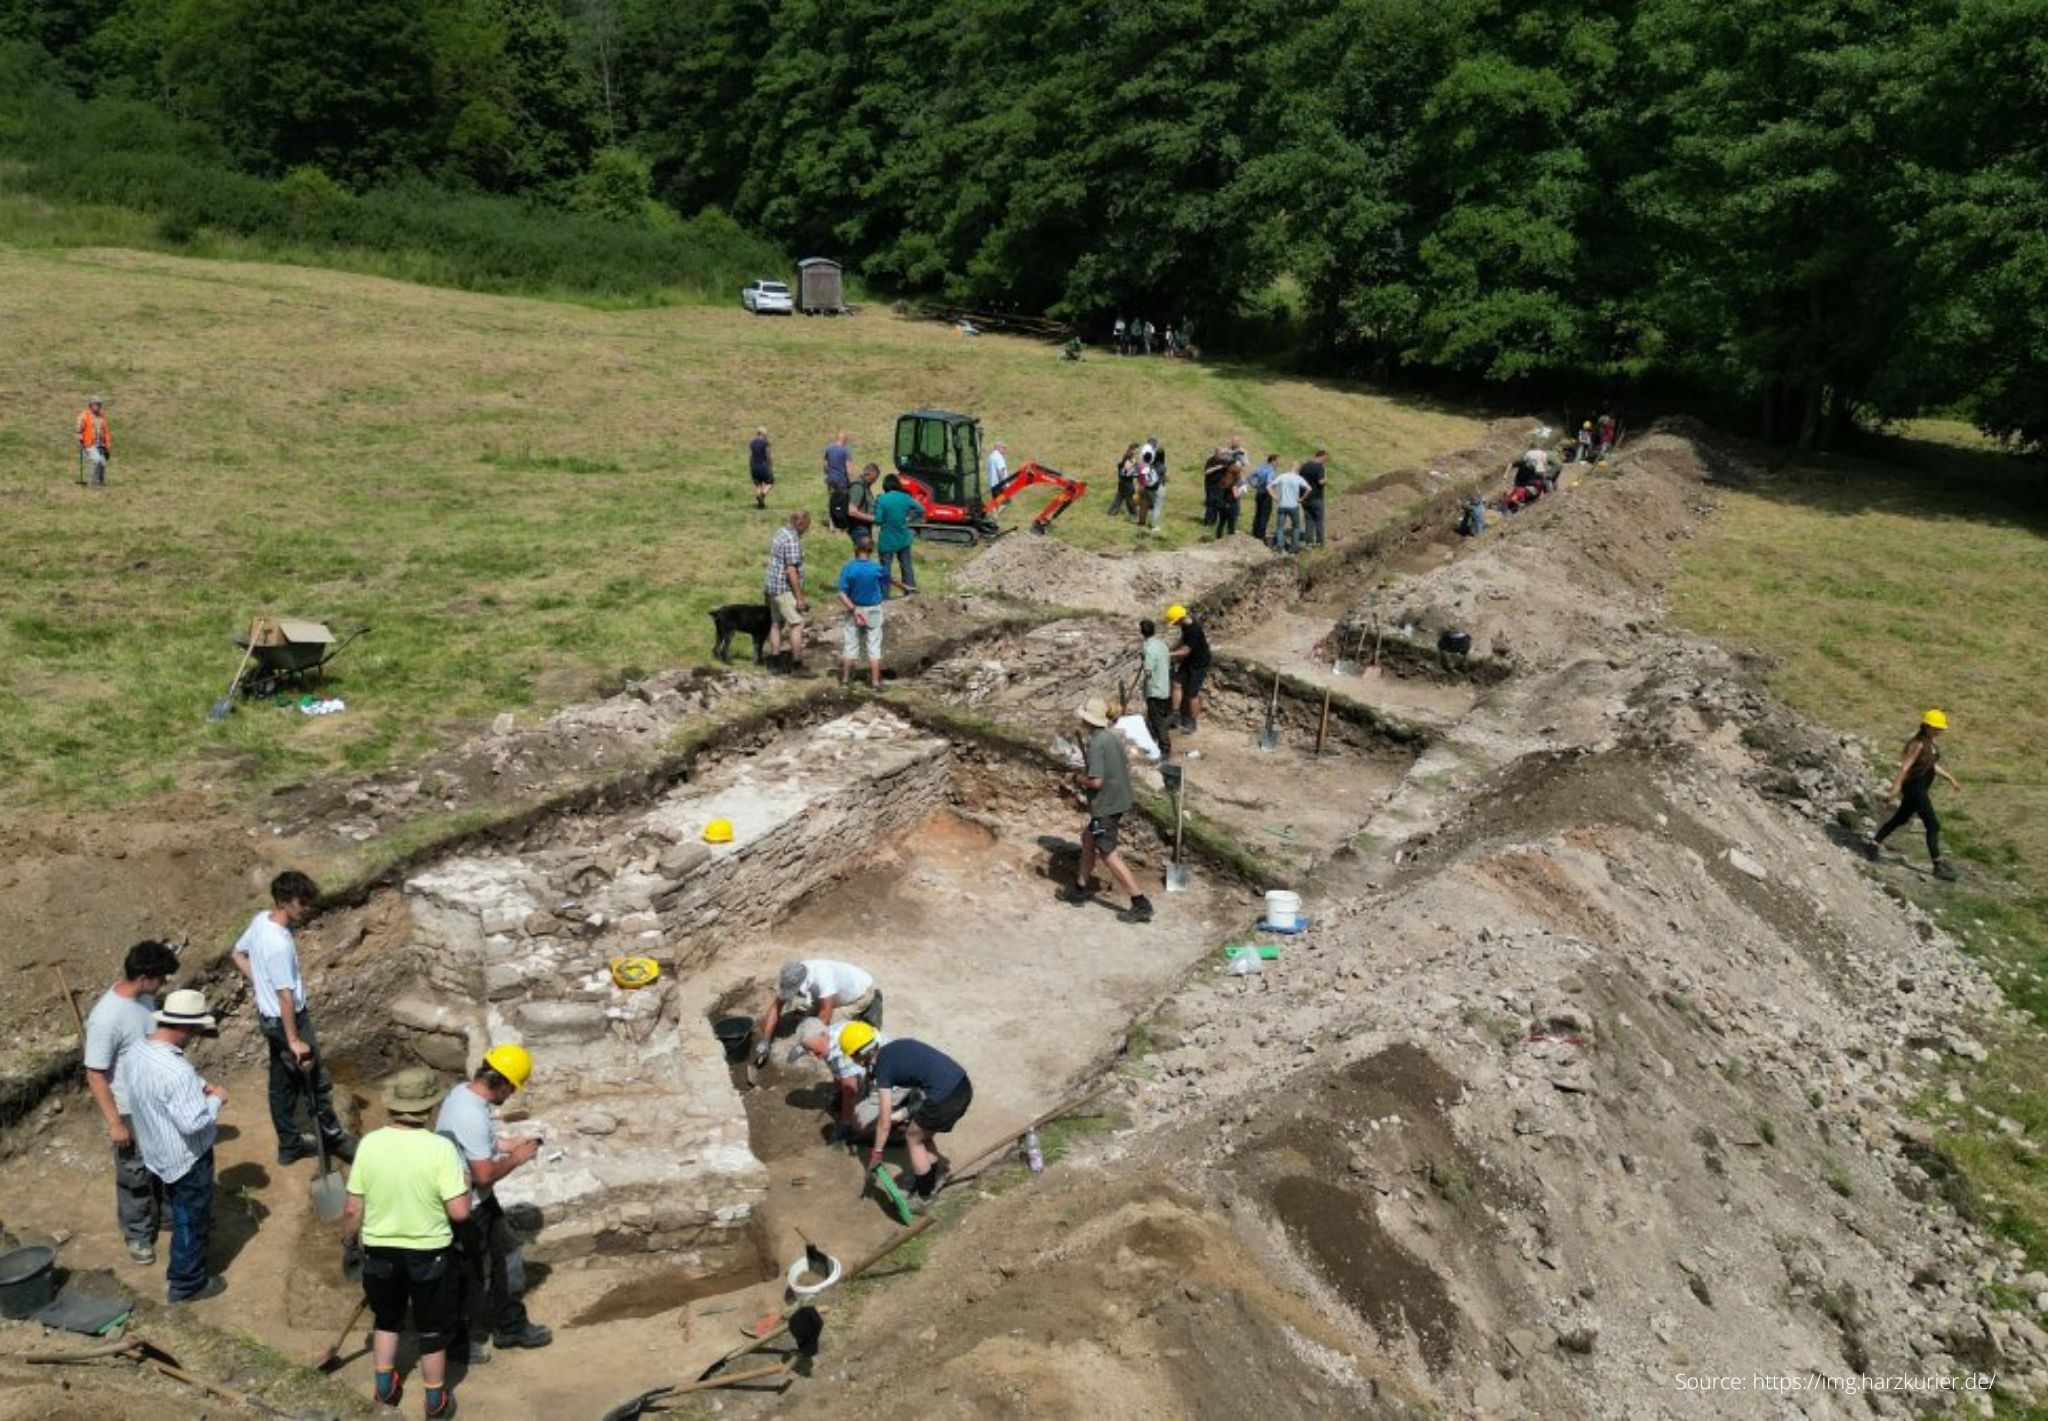 archaeologists are excavating the ruins of the medieval monastery.